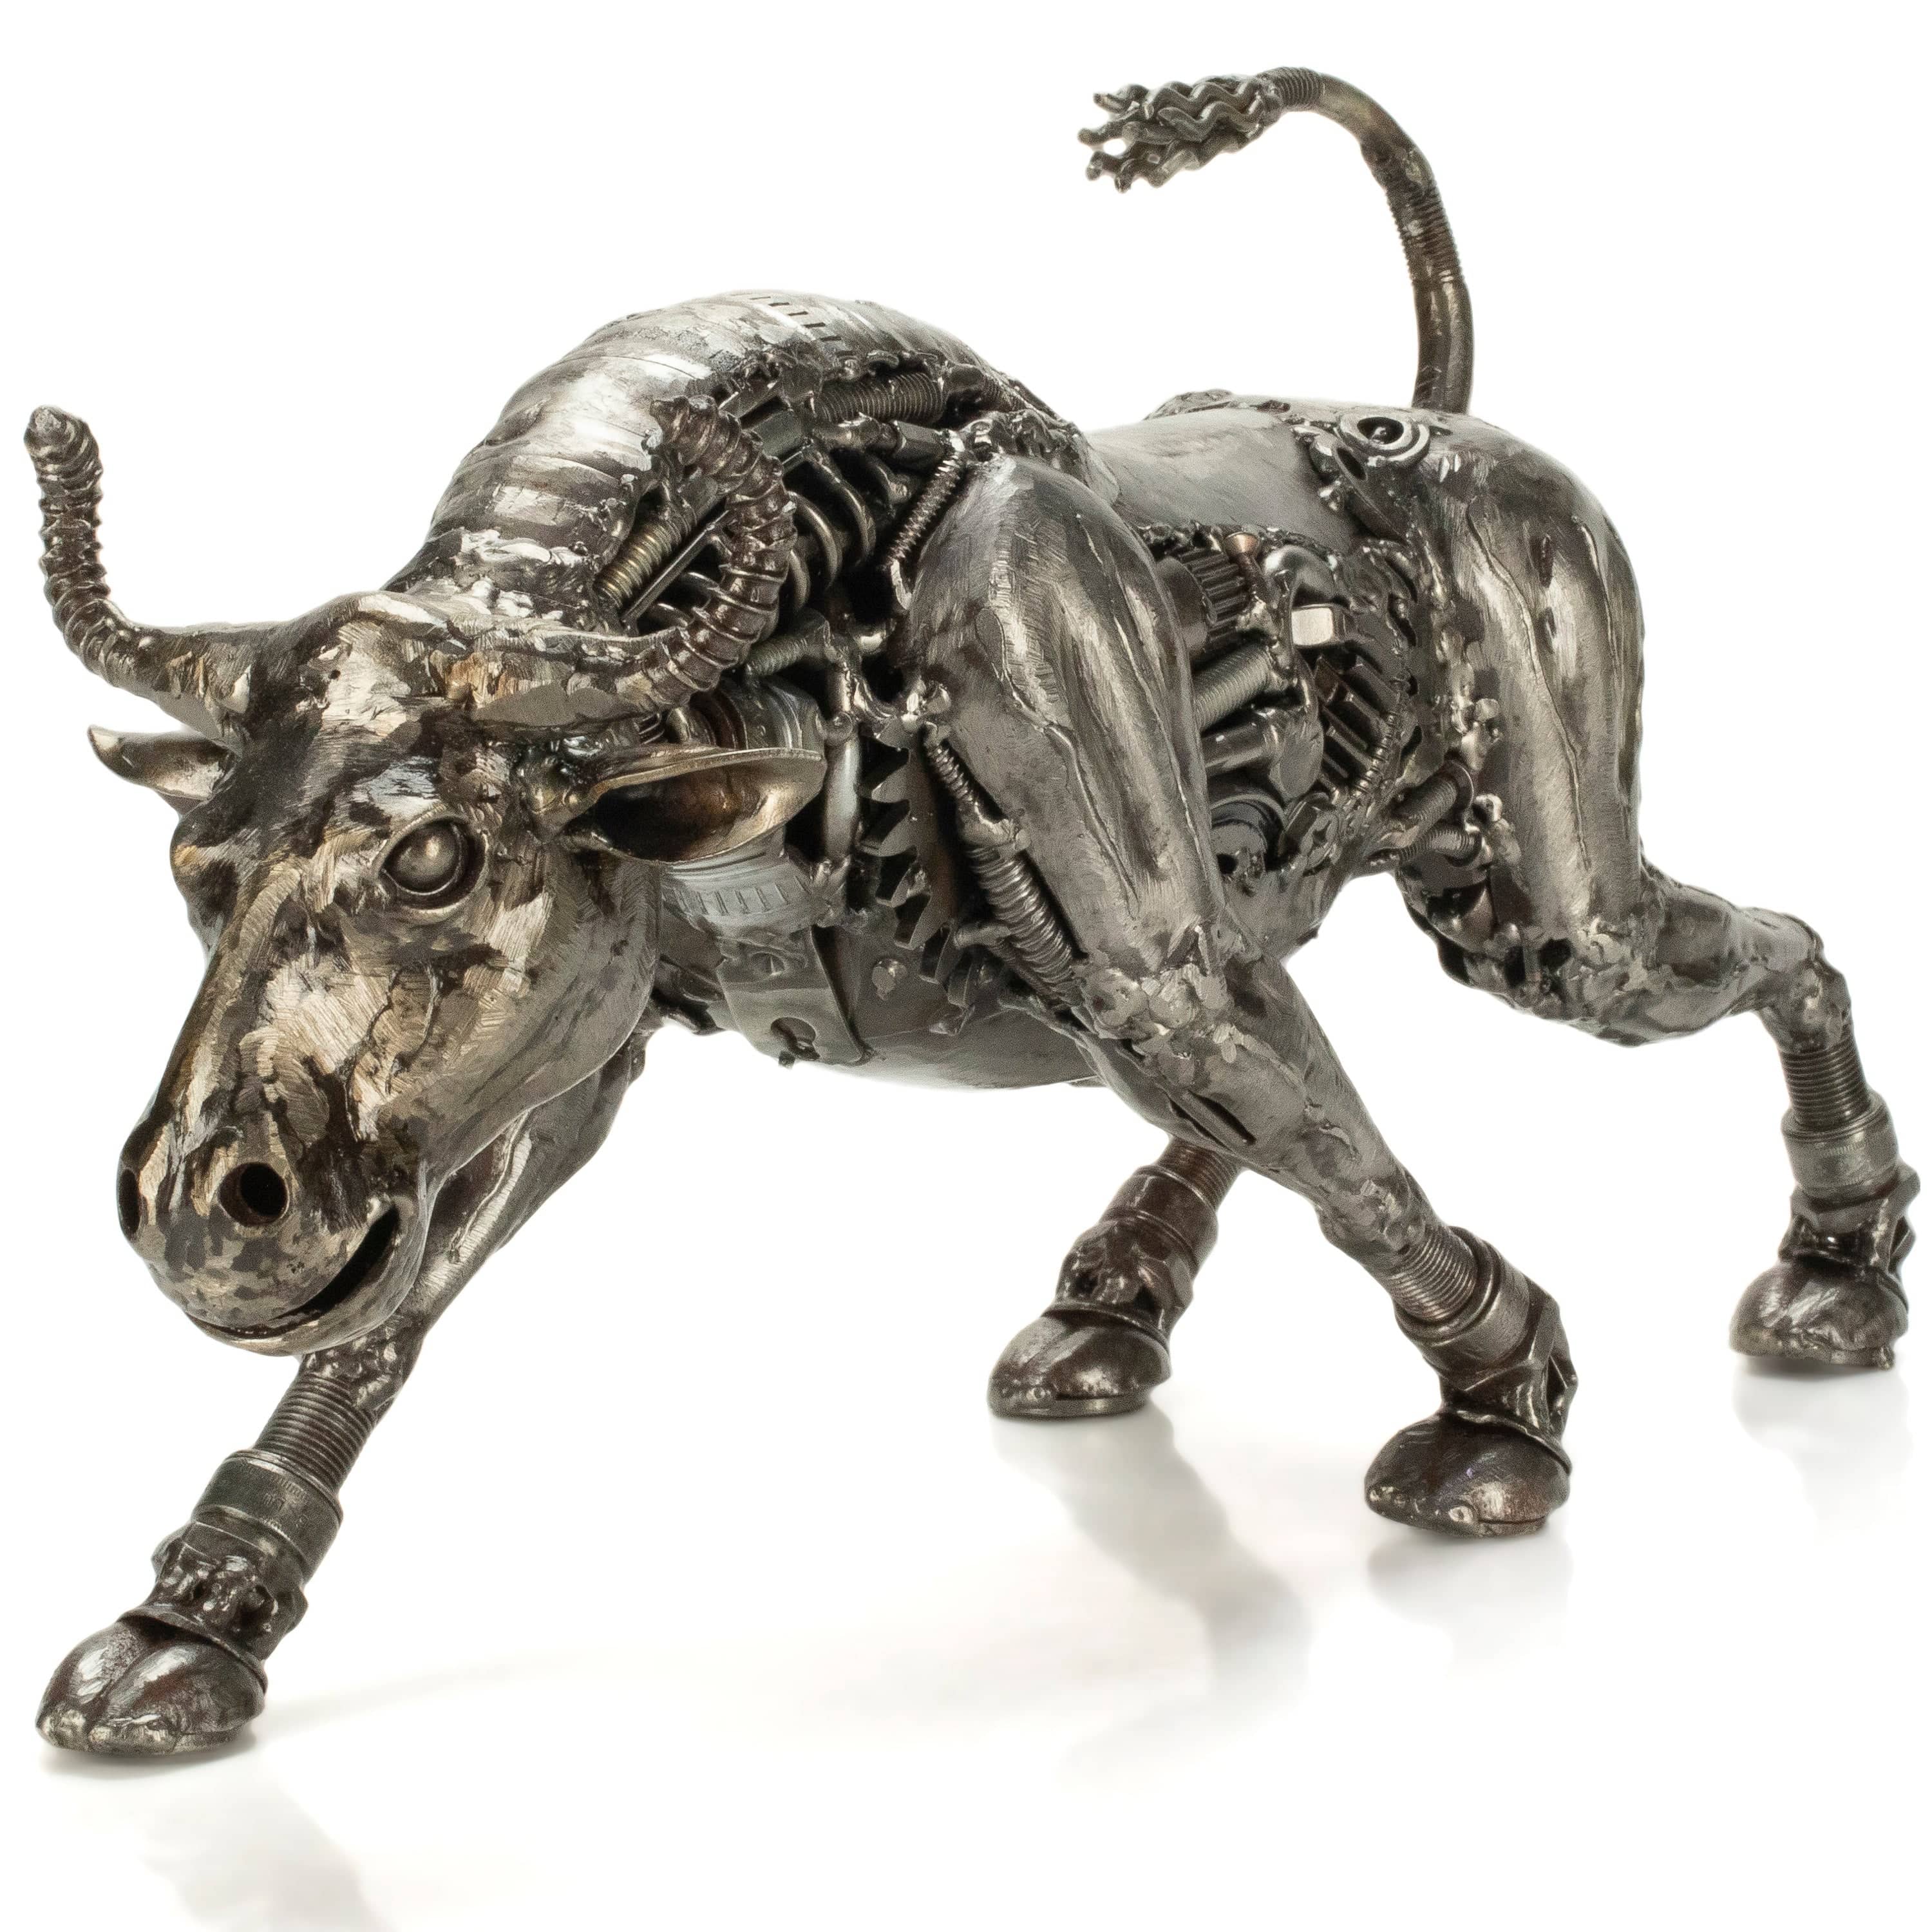 KALIFANO Recycled Metal Art Charging Bull Inspired Recycled Metal Art Sculpture RMS-2500BL-PK